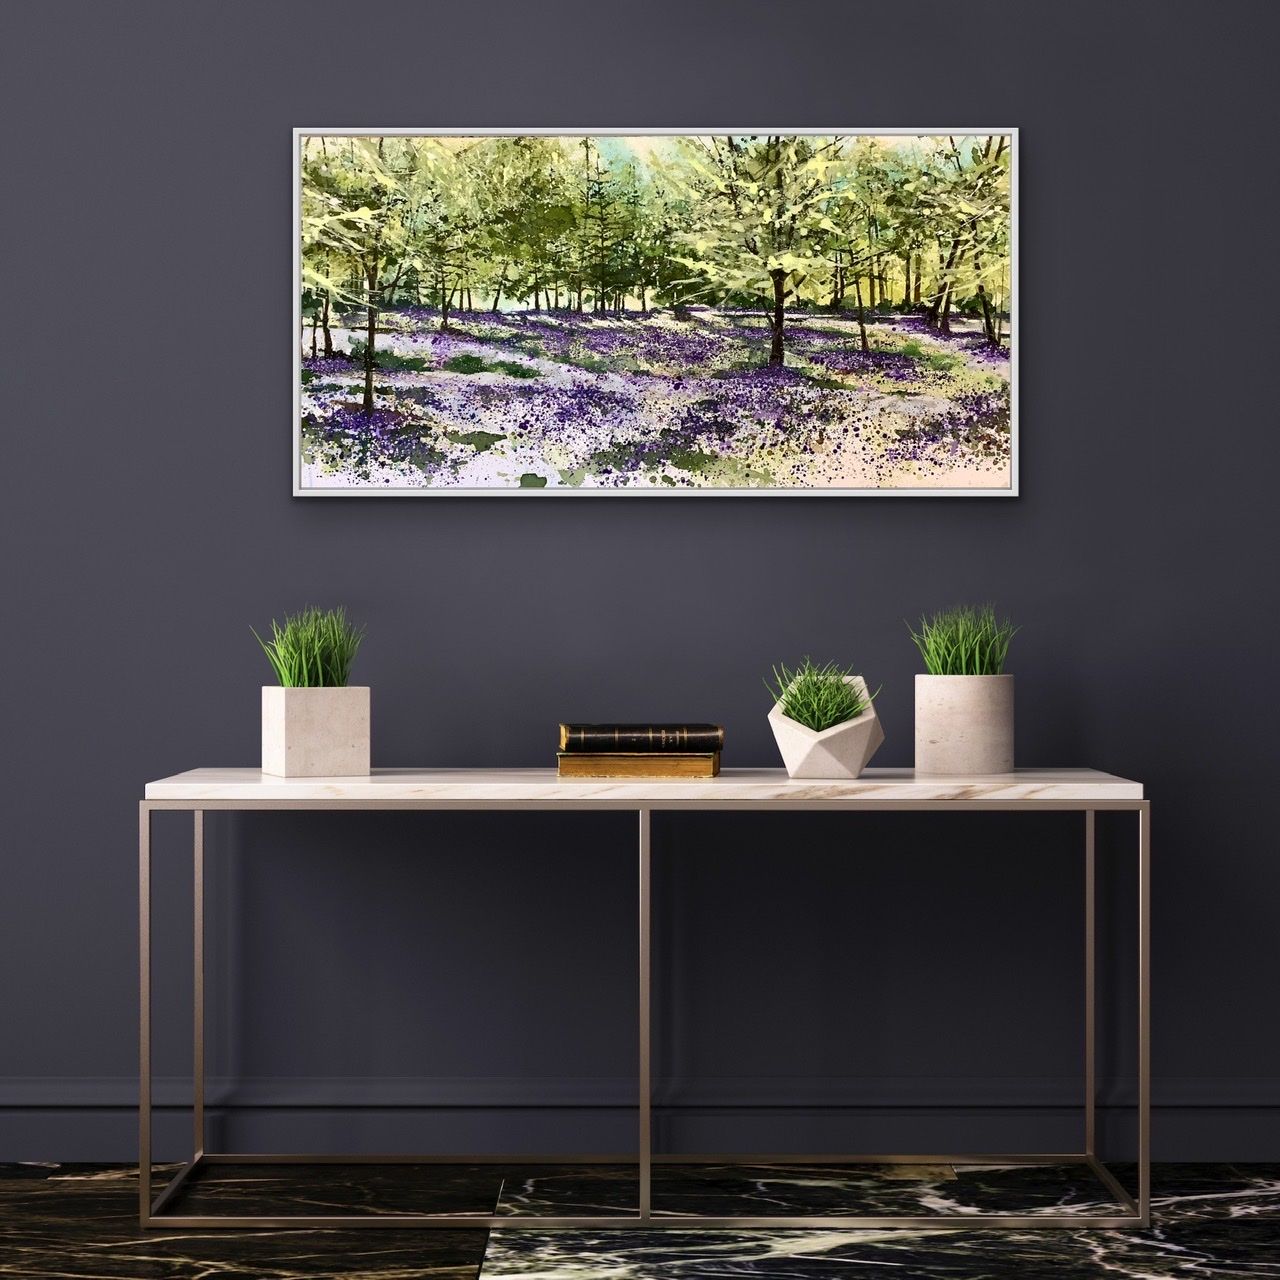 Spring Time Came Quickly by Adele Riley - Secondary Image